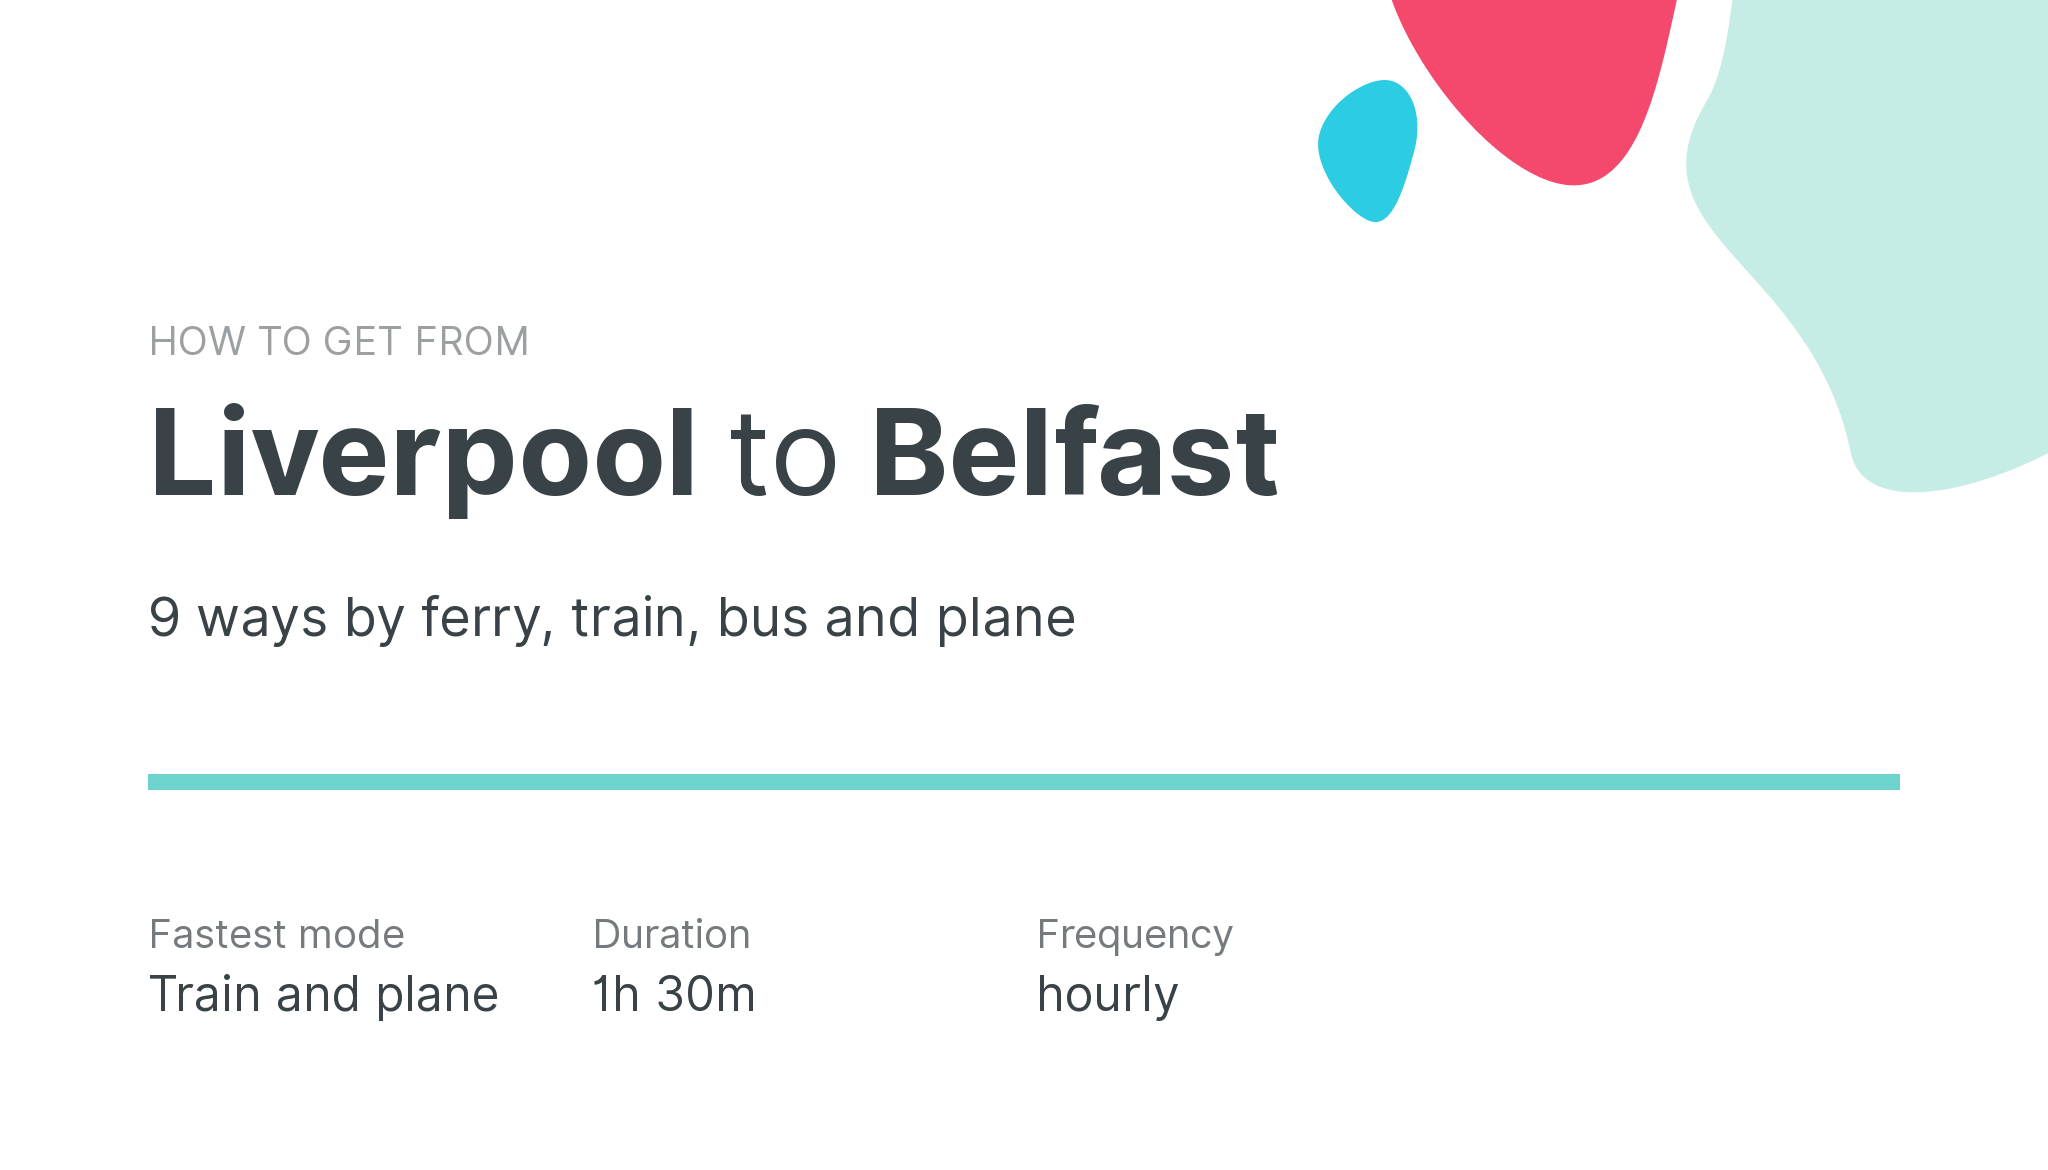 How do I get from Liverpool to Belfast